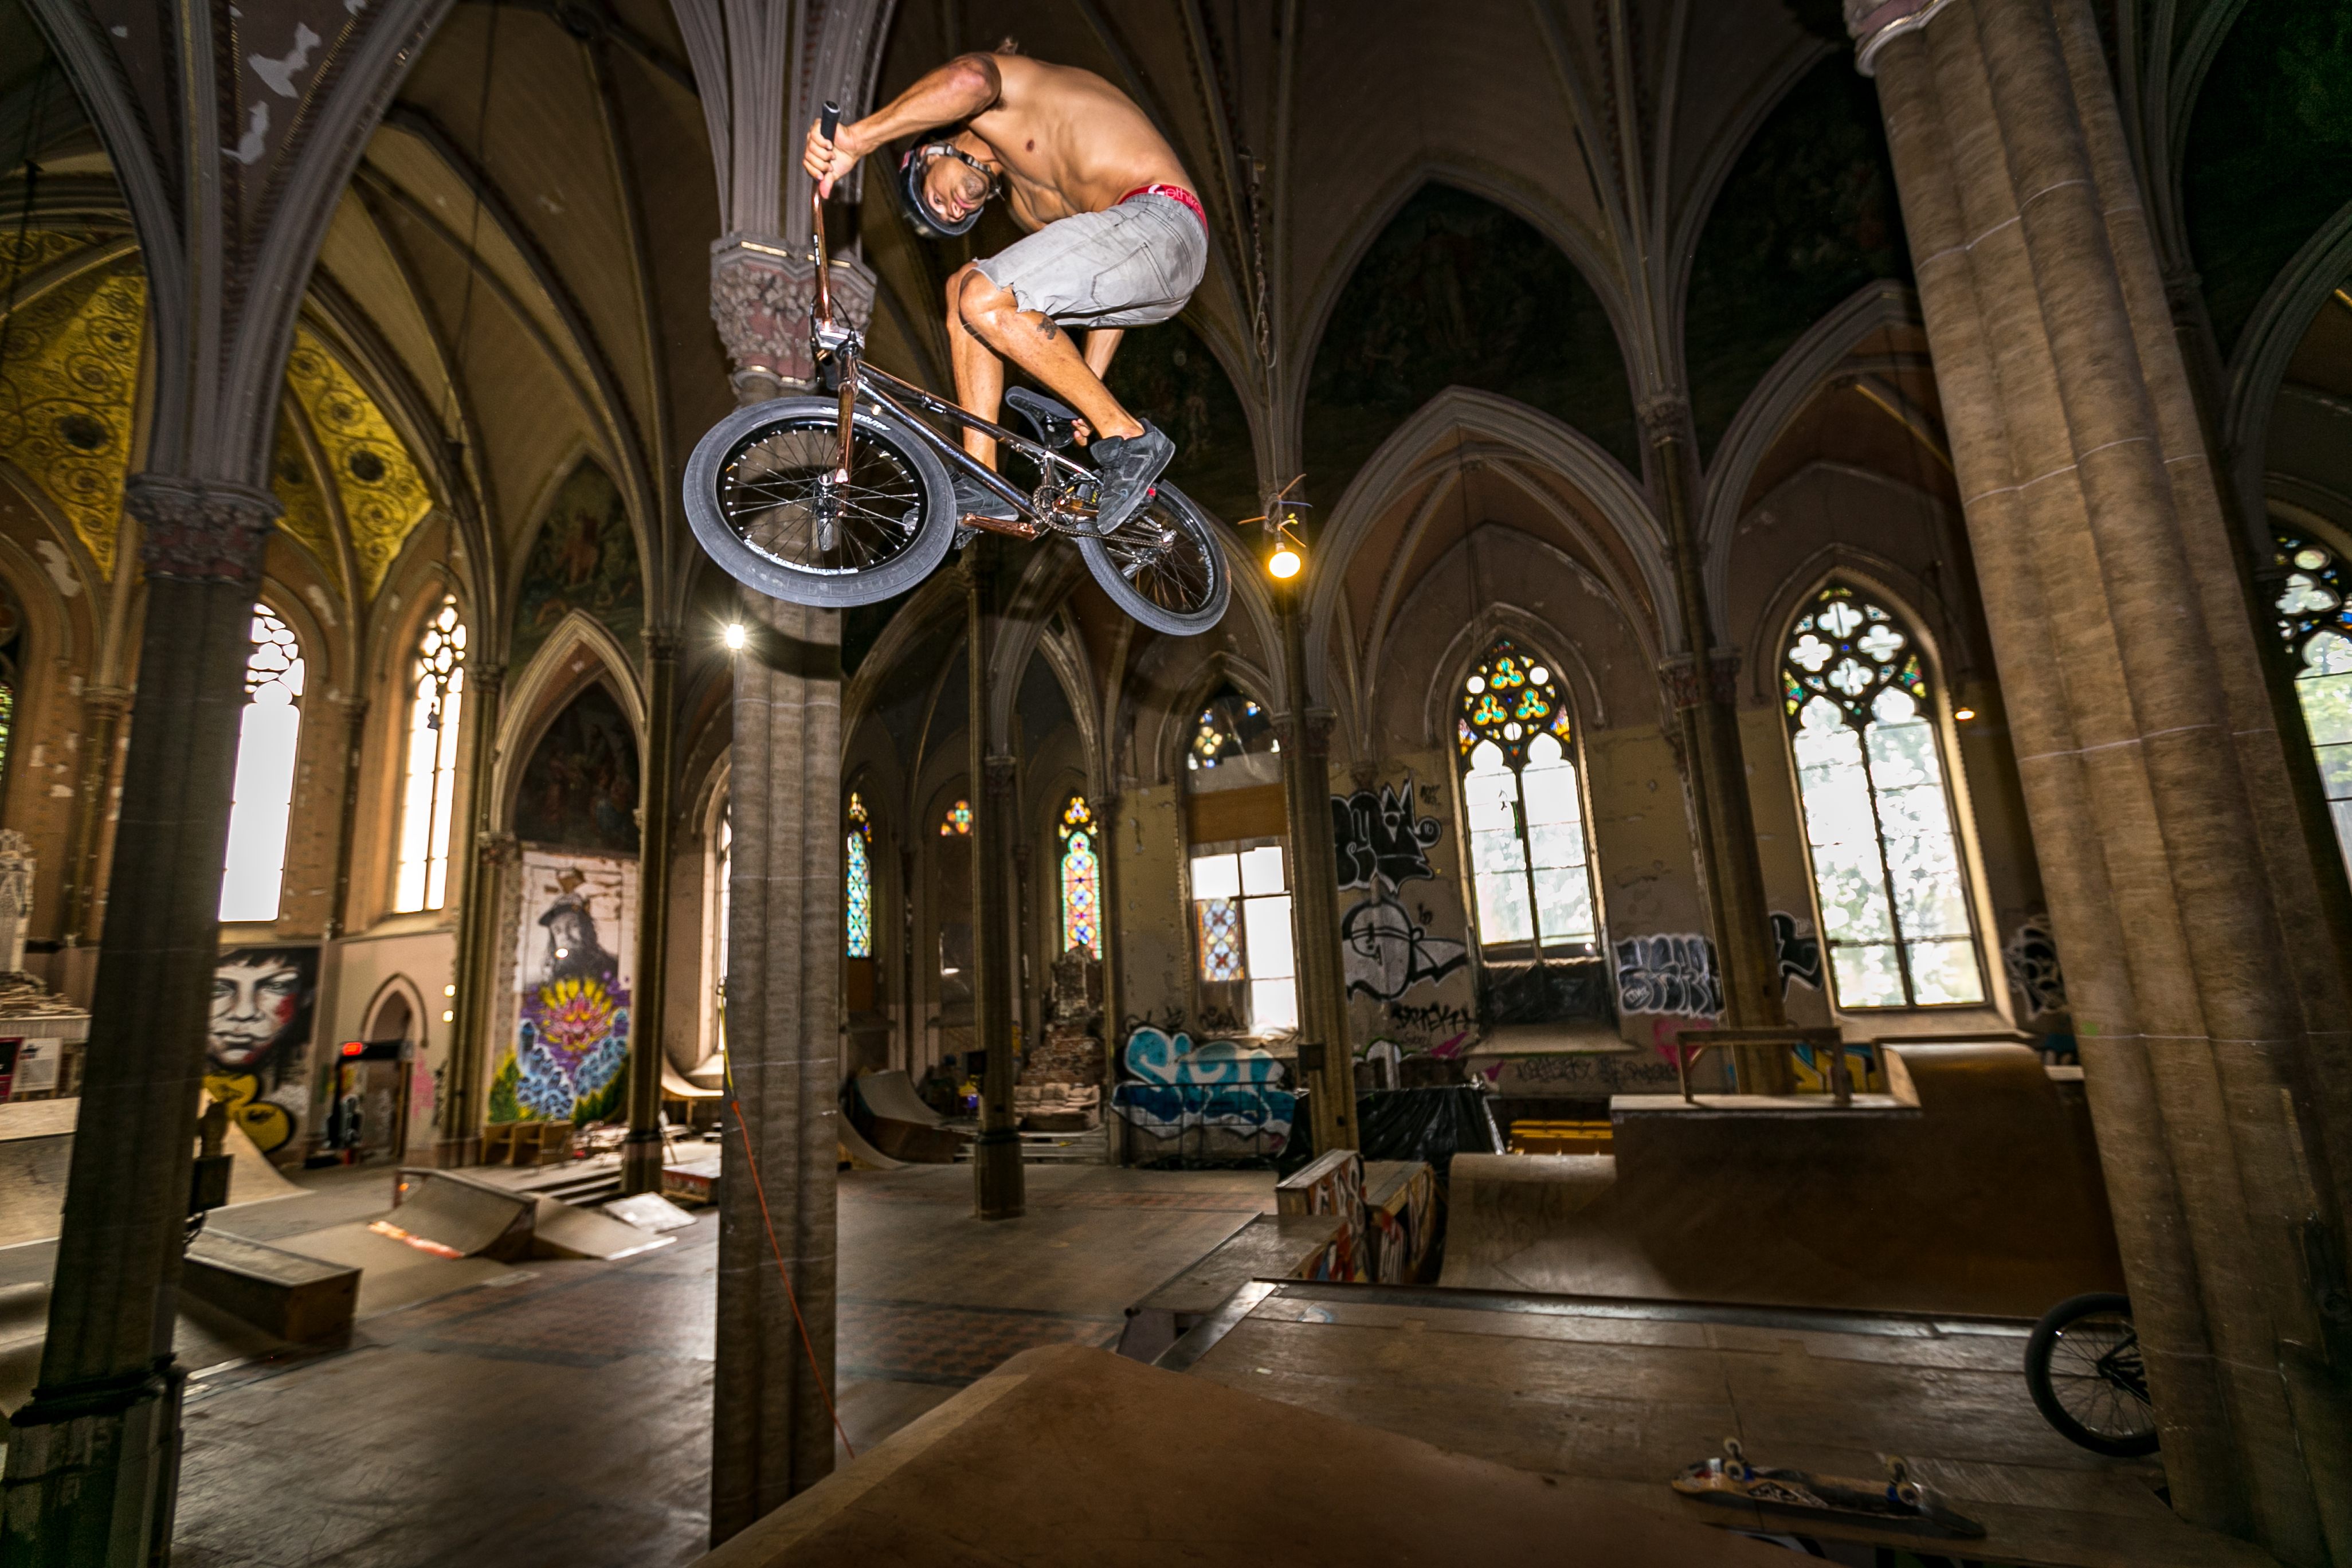 Professional BMX rider and X Games athlete Alex Landeros performs a lazy back seat grab trick in the church.